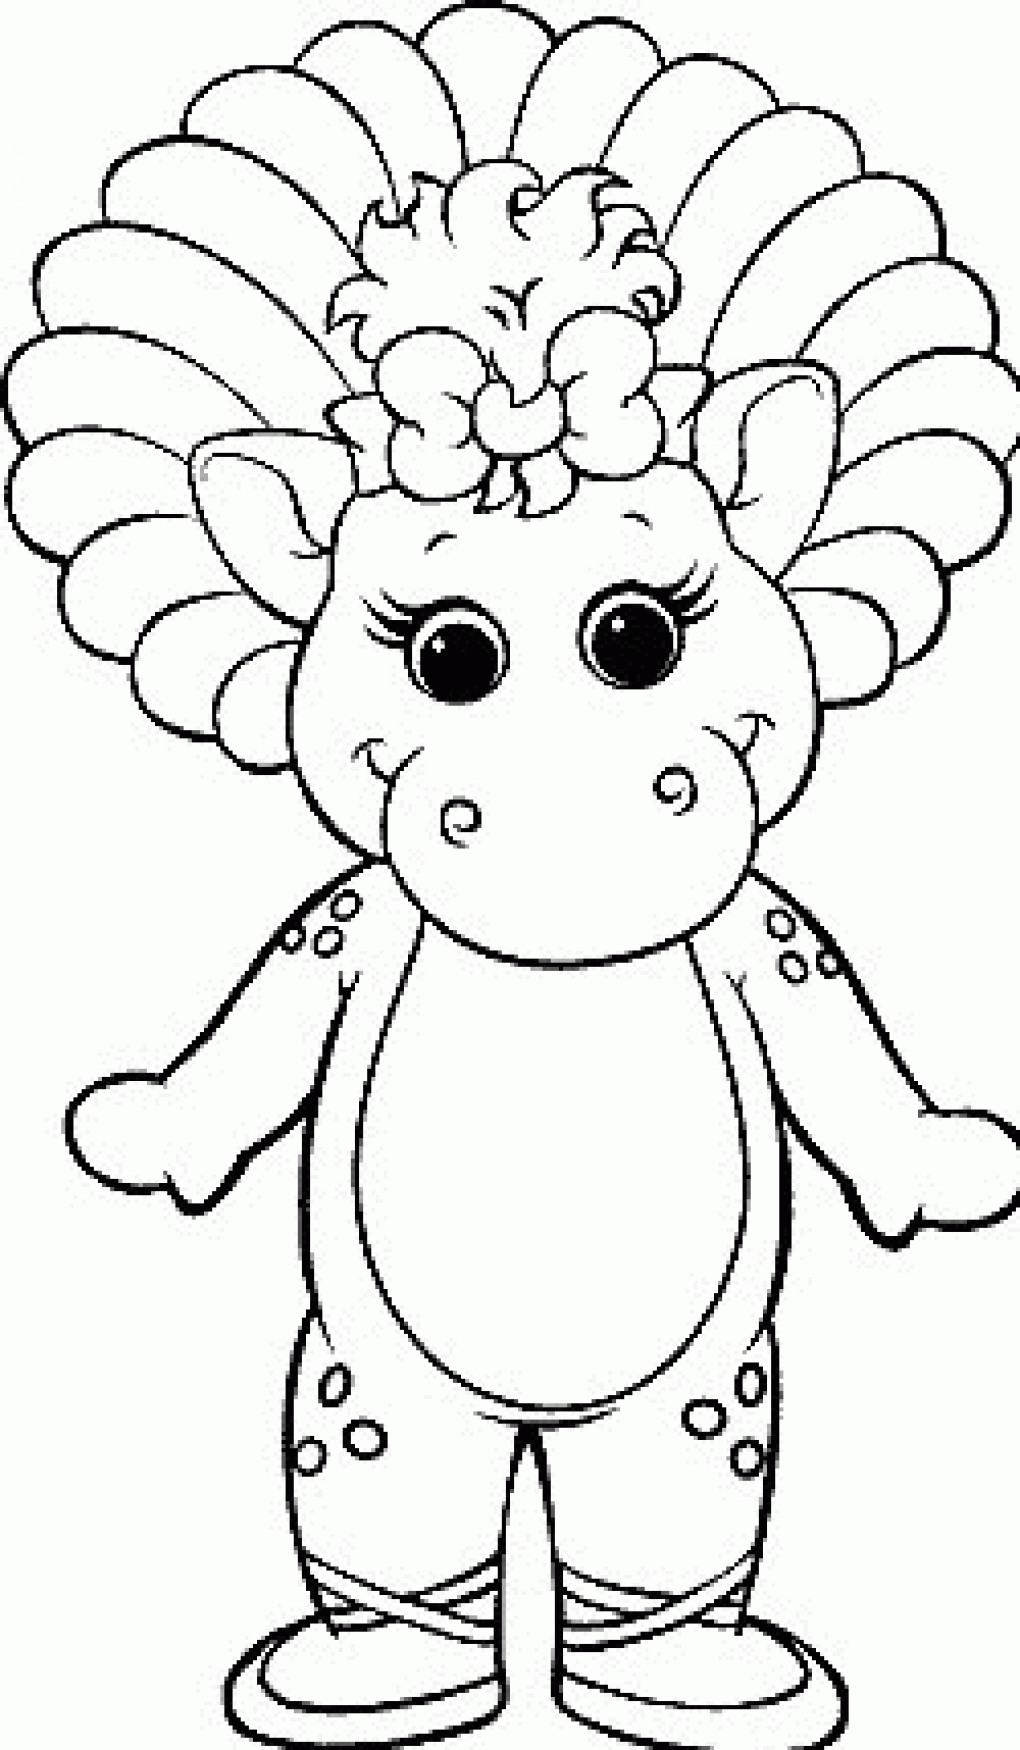 Barney Birthday Coloring Pages - Coloring Home